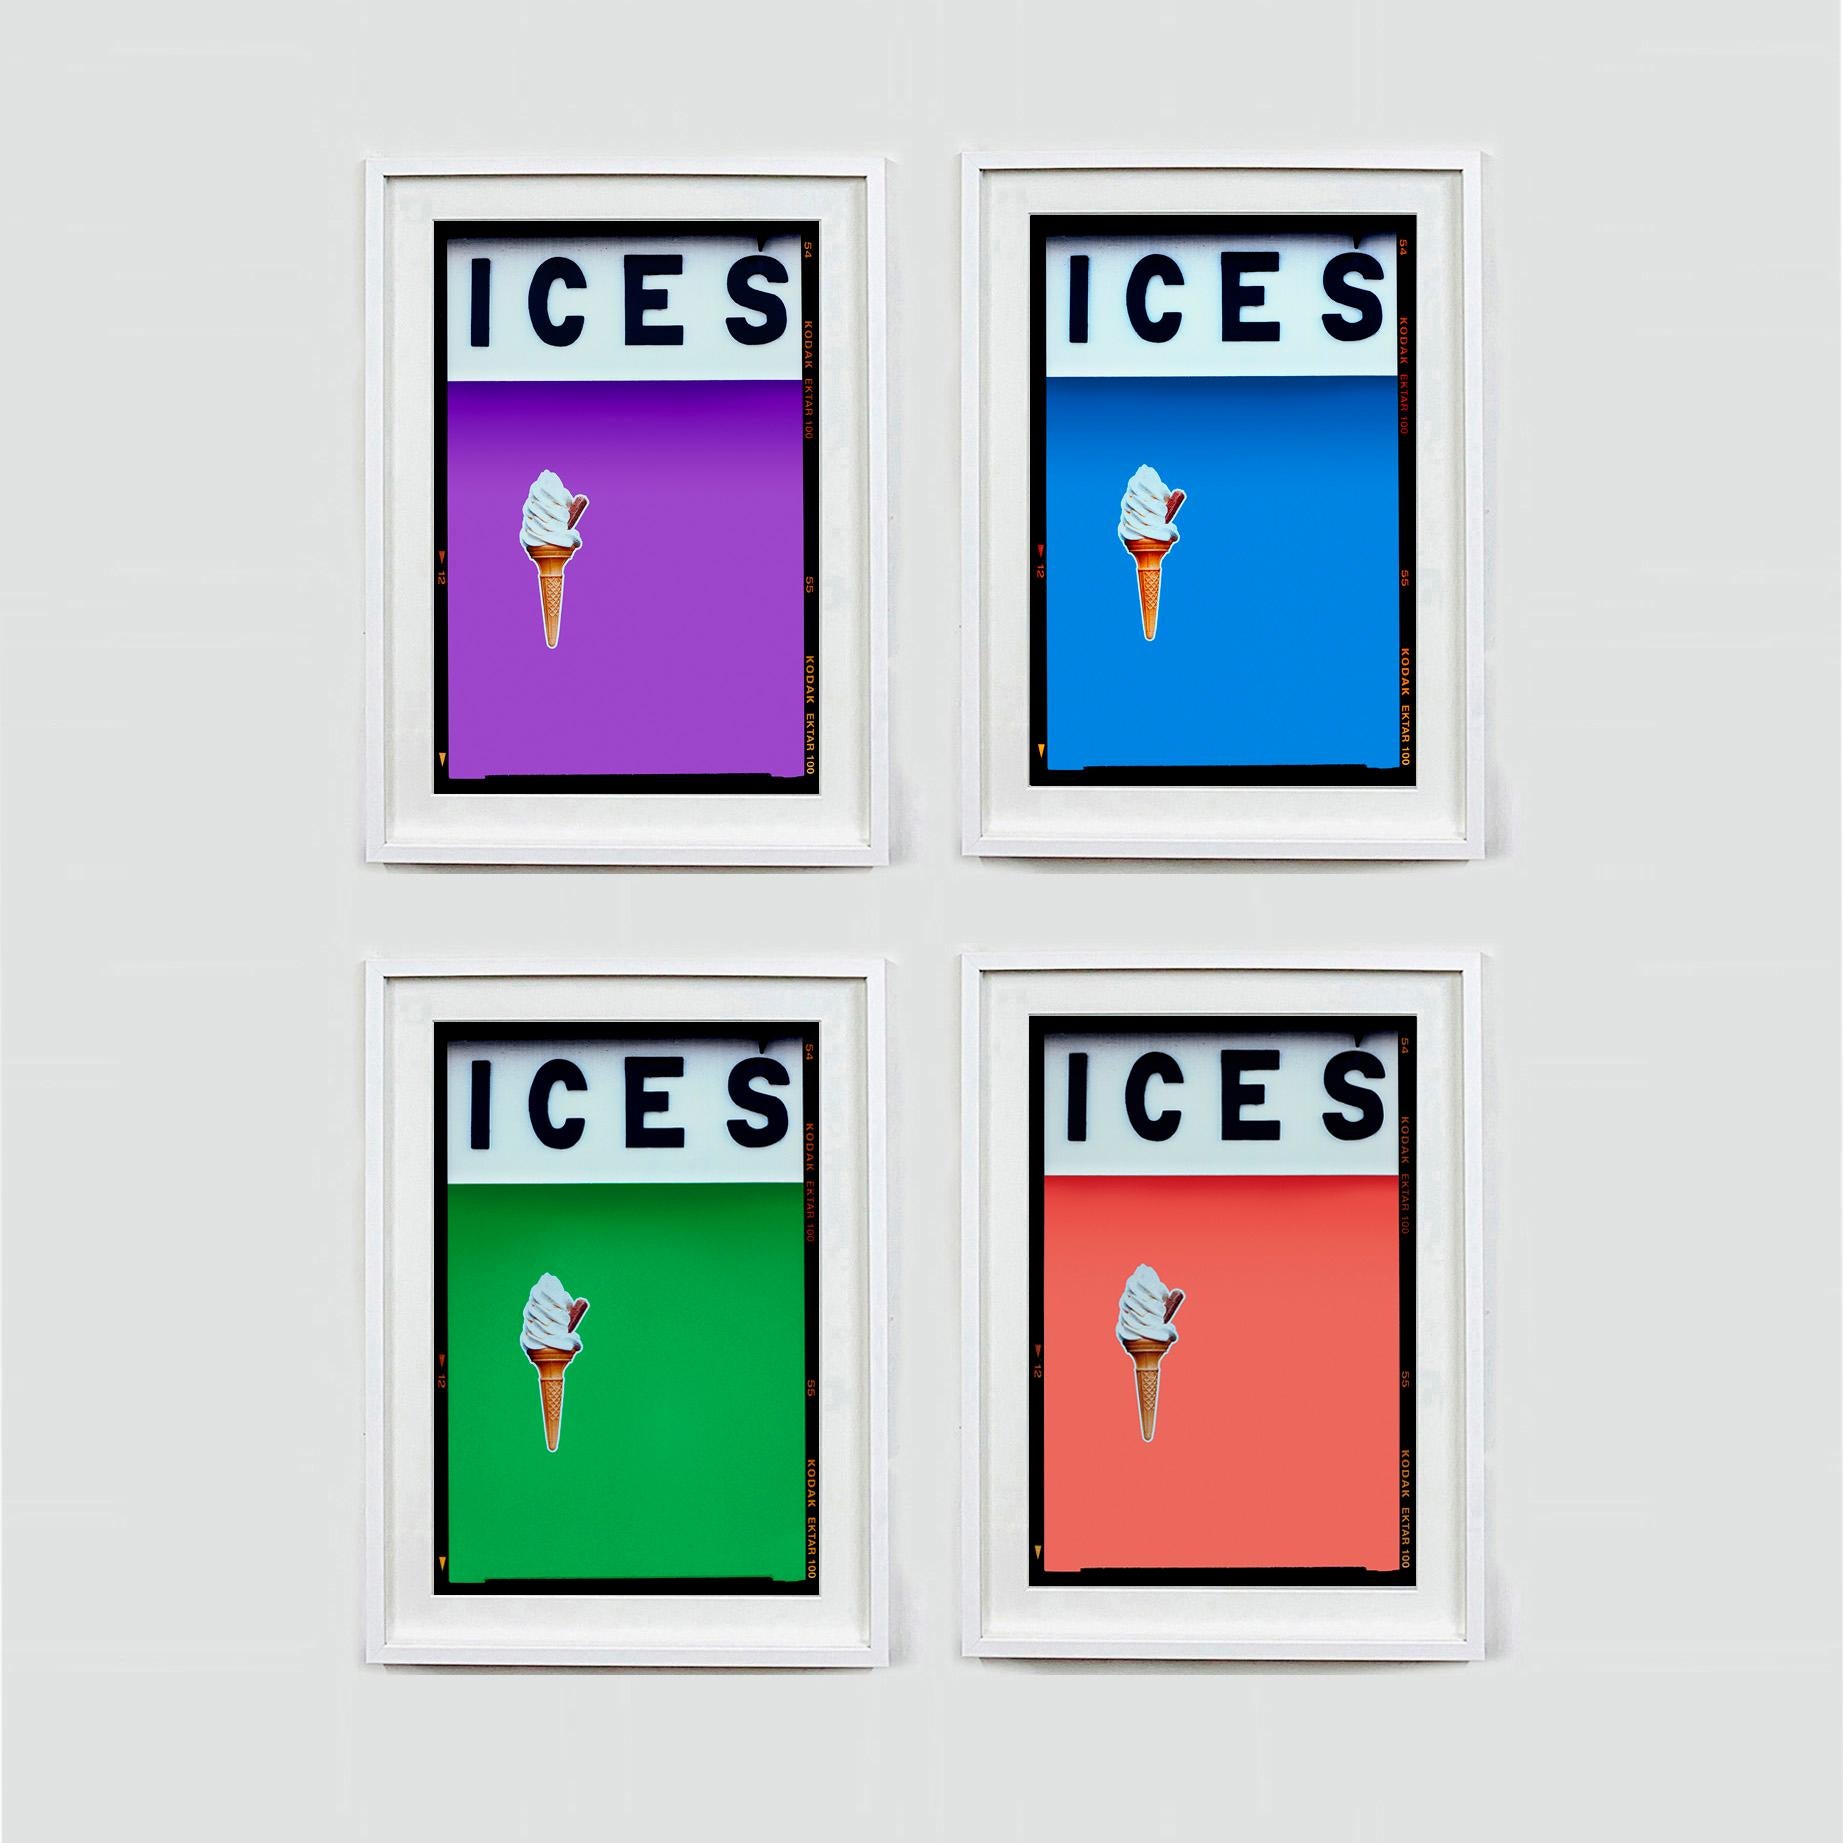 ICES, by Richard Heeps, photographed at the British Seaside at the end of summer 2020. This artwork is about evoking memories of the simple joy of days by the beach. The melondrama coral orange color blocking, typography and the surreal twist of the